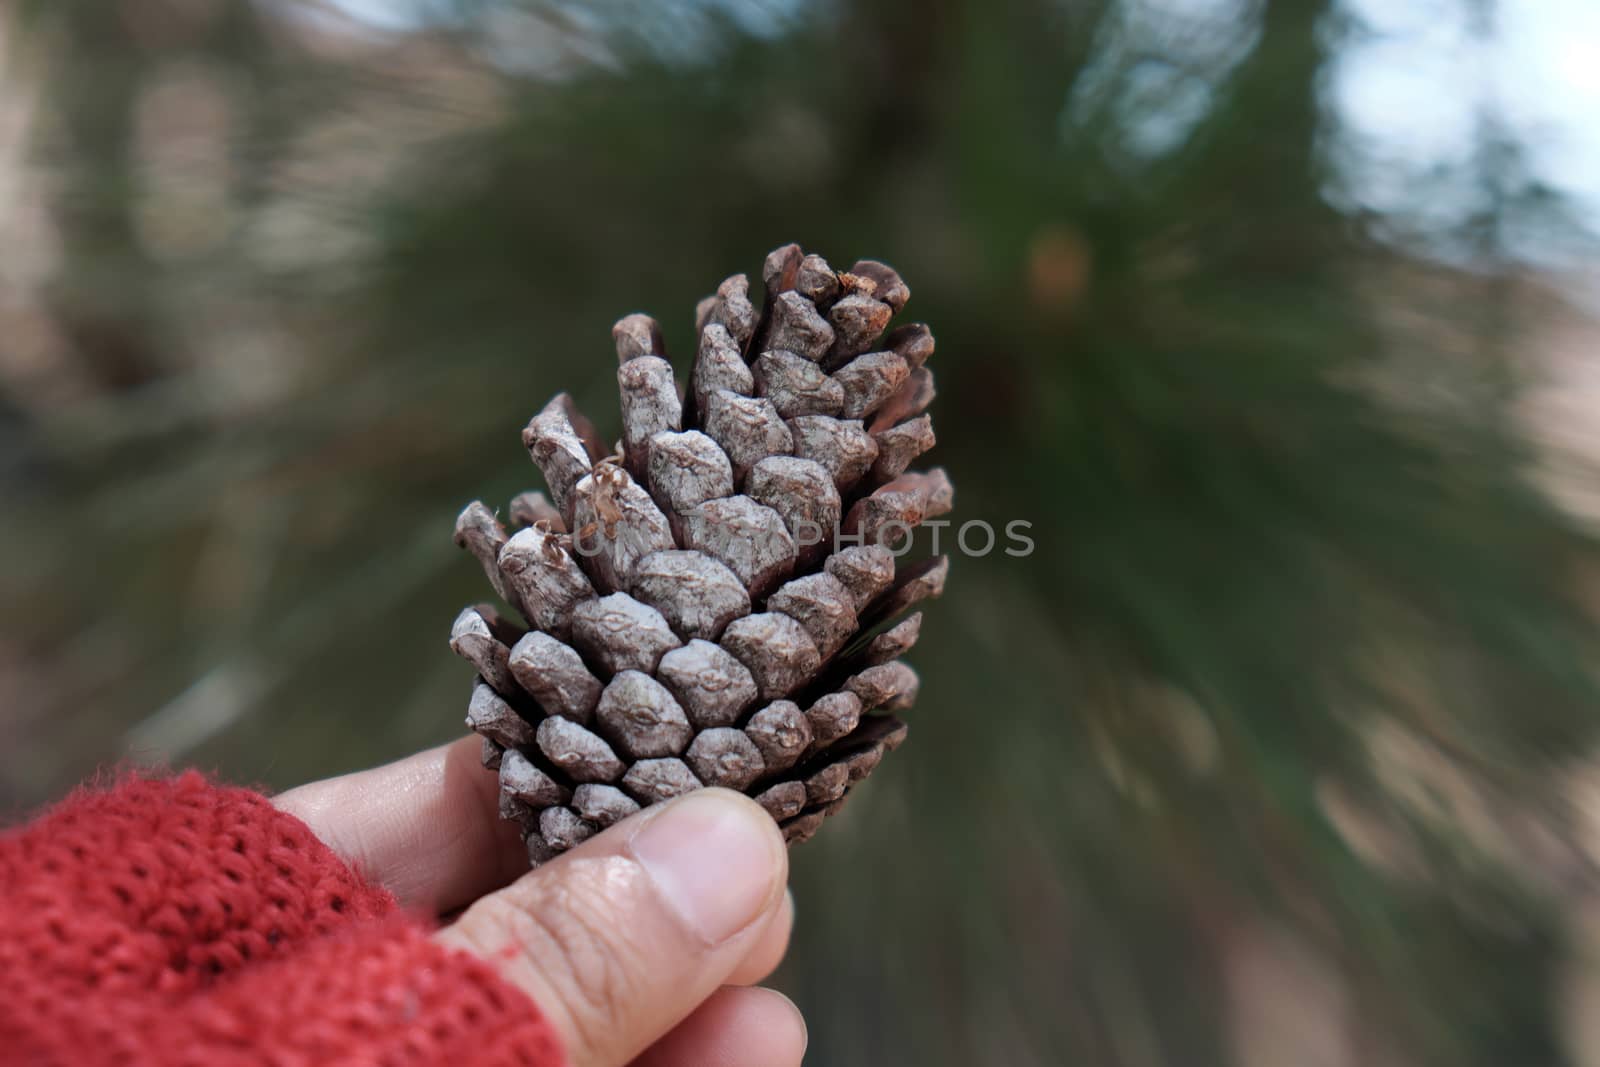  rotten pinecone fall from pine tree in Dalat forest, pine cone is symbol of Christmas season and also is Xmas ornament